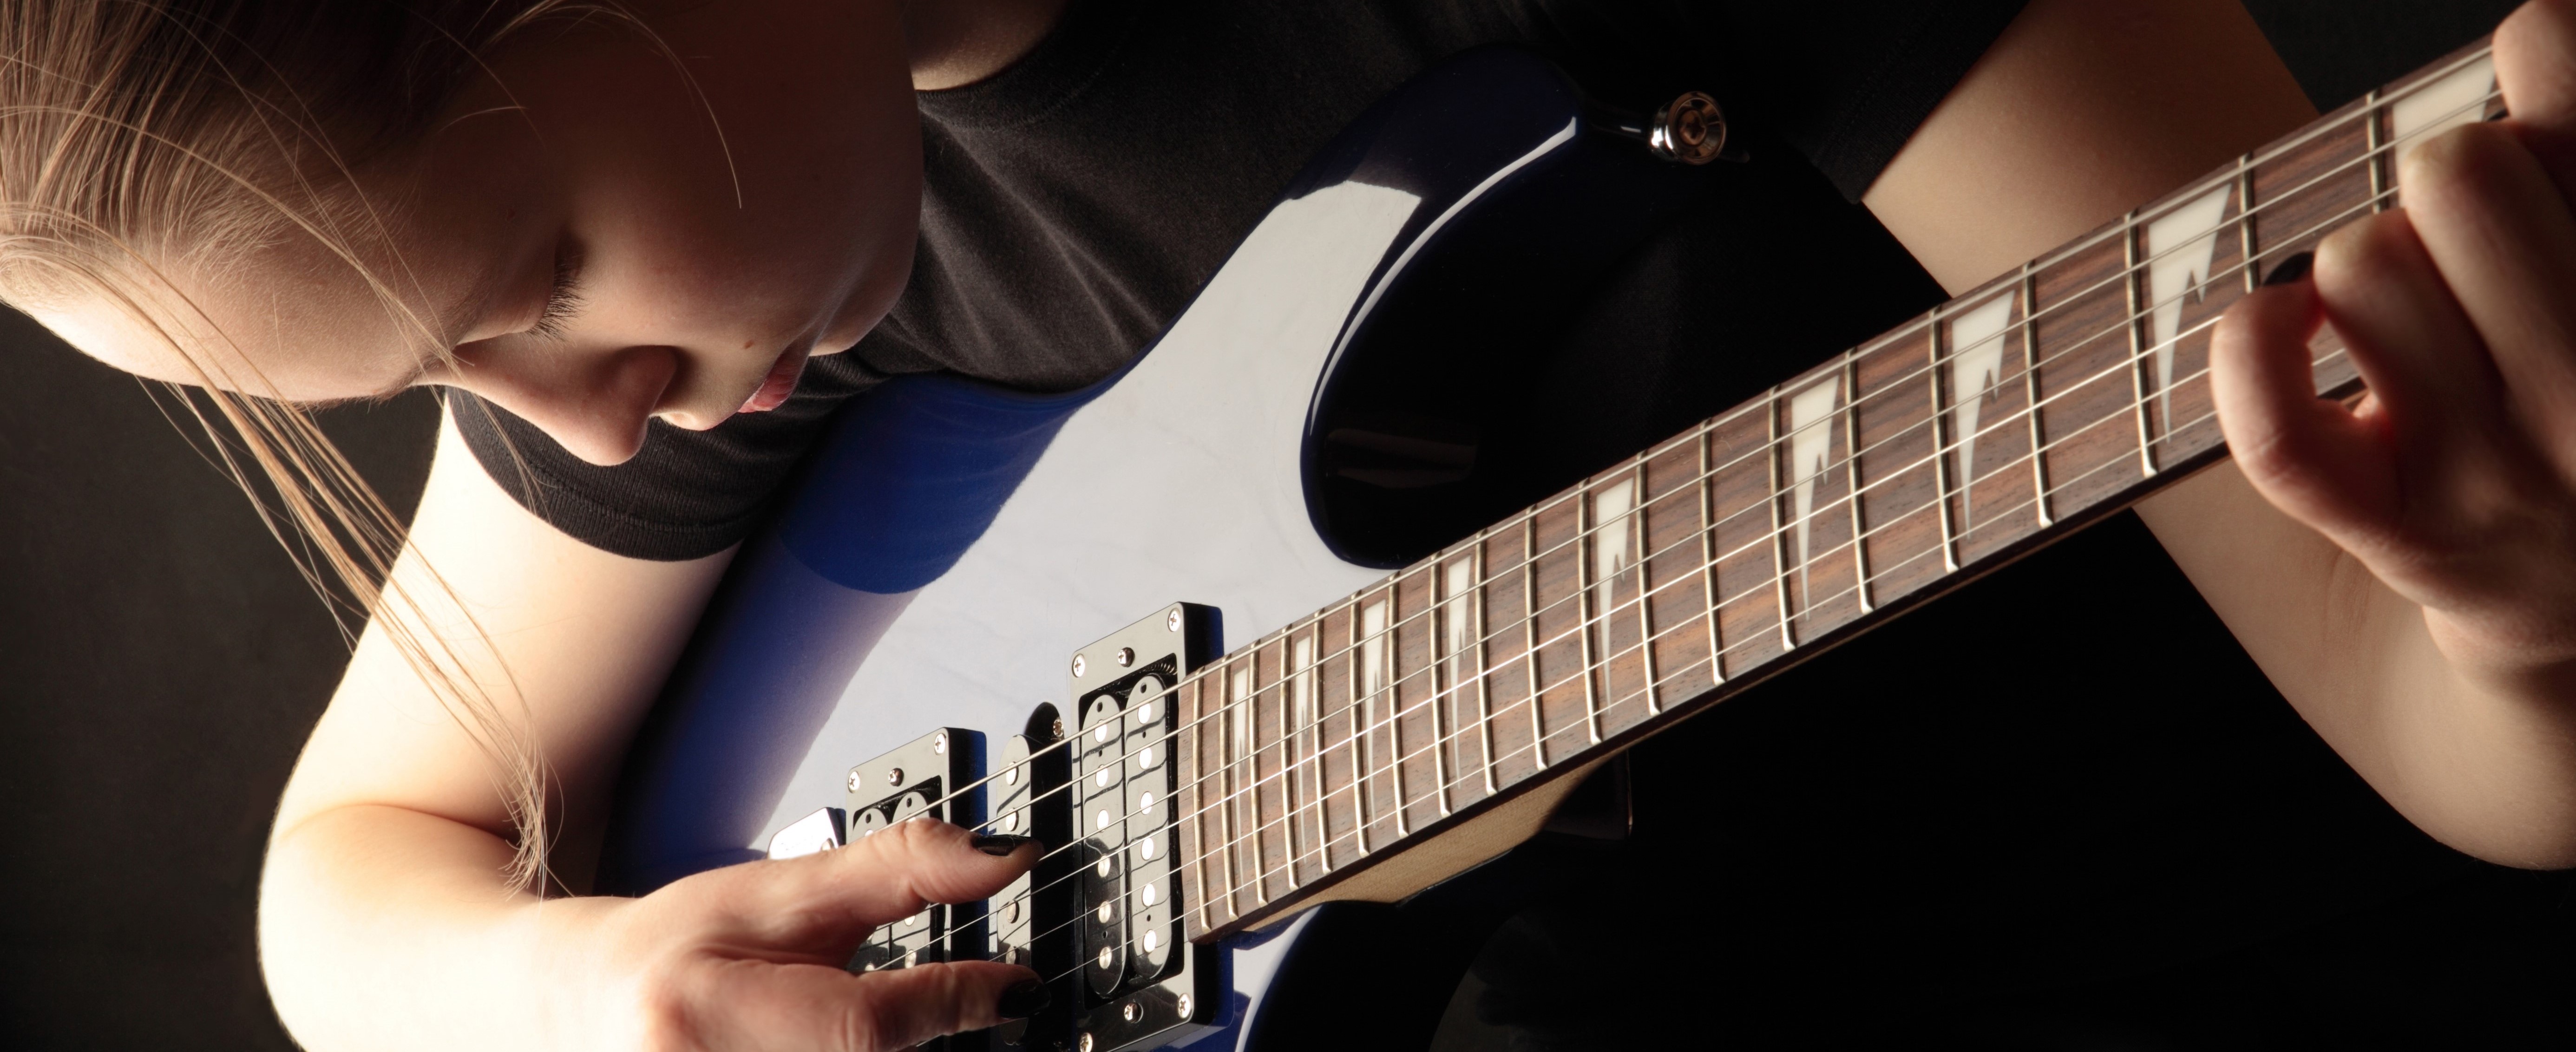 A close up of someone playing the guitar